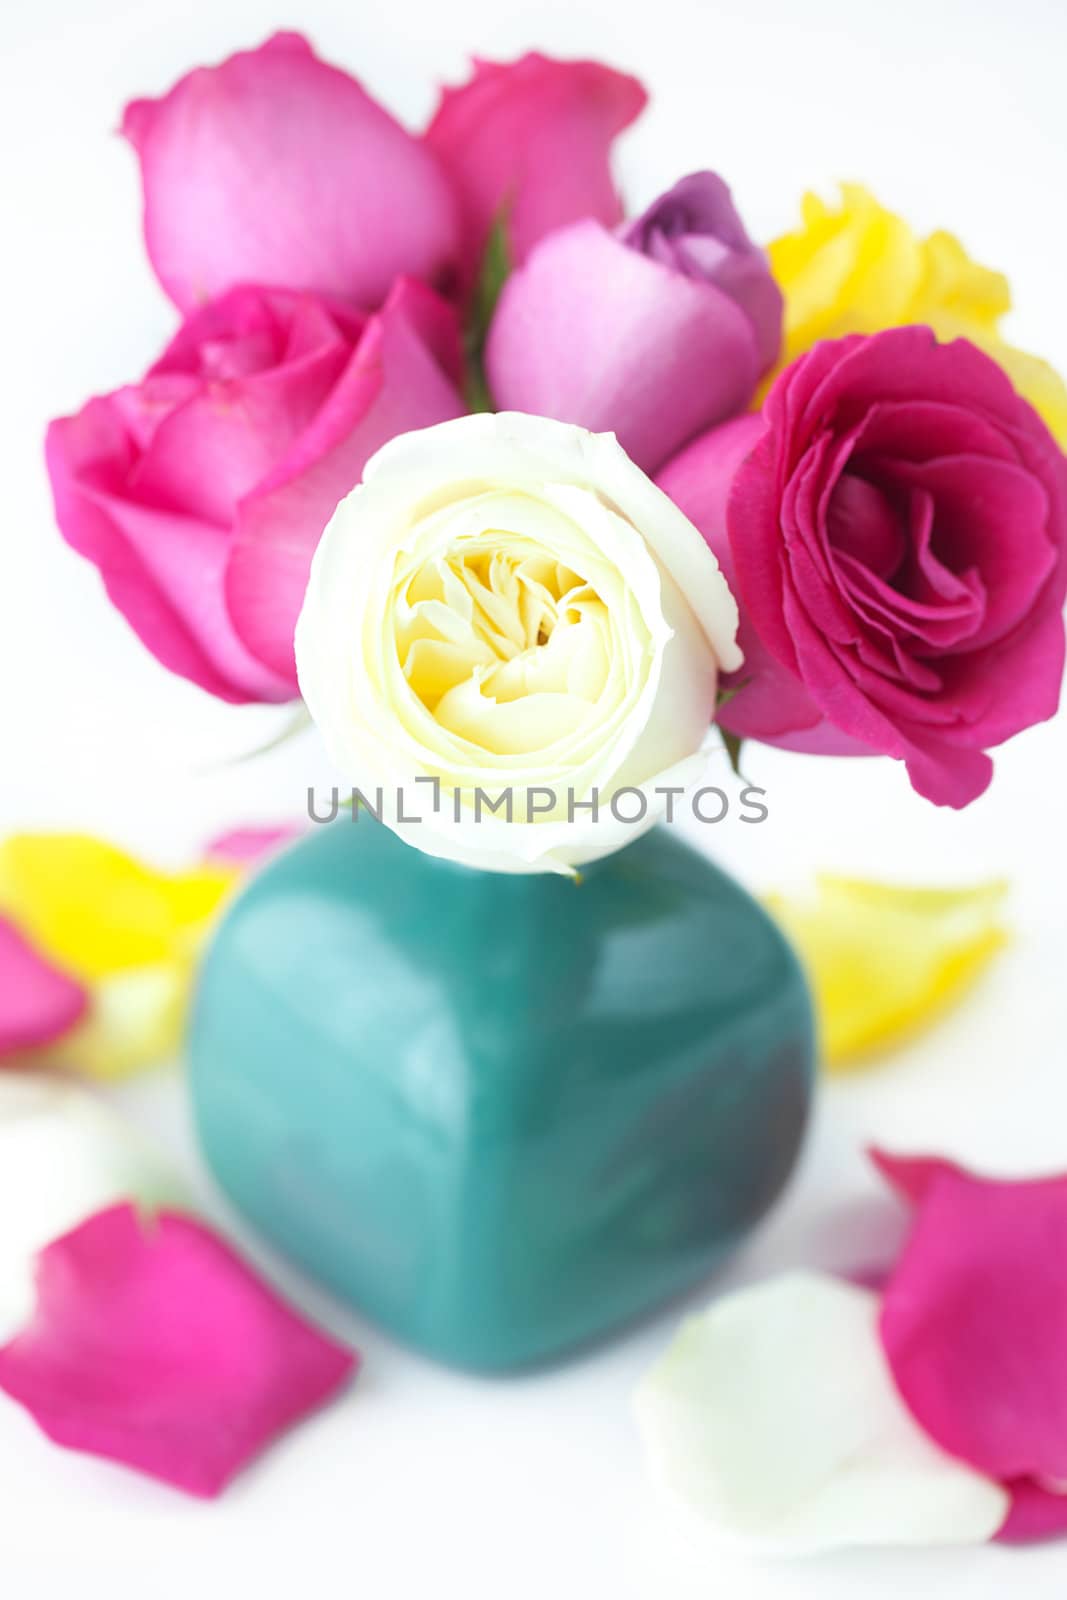 bouquet of colorful roses in vase and petals  by jannyjus